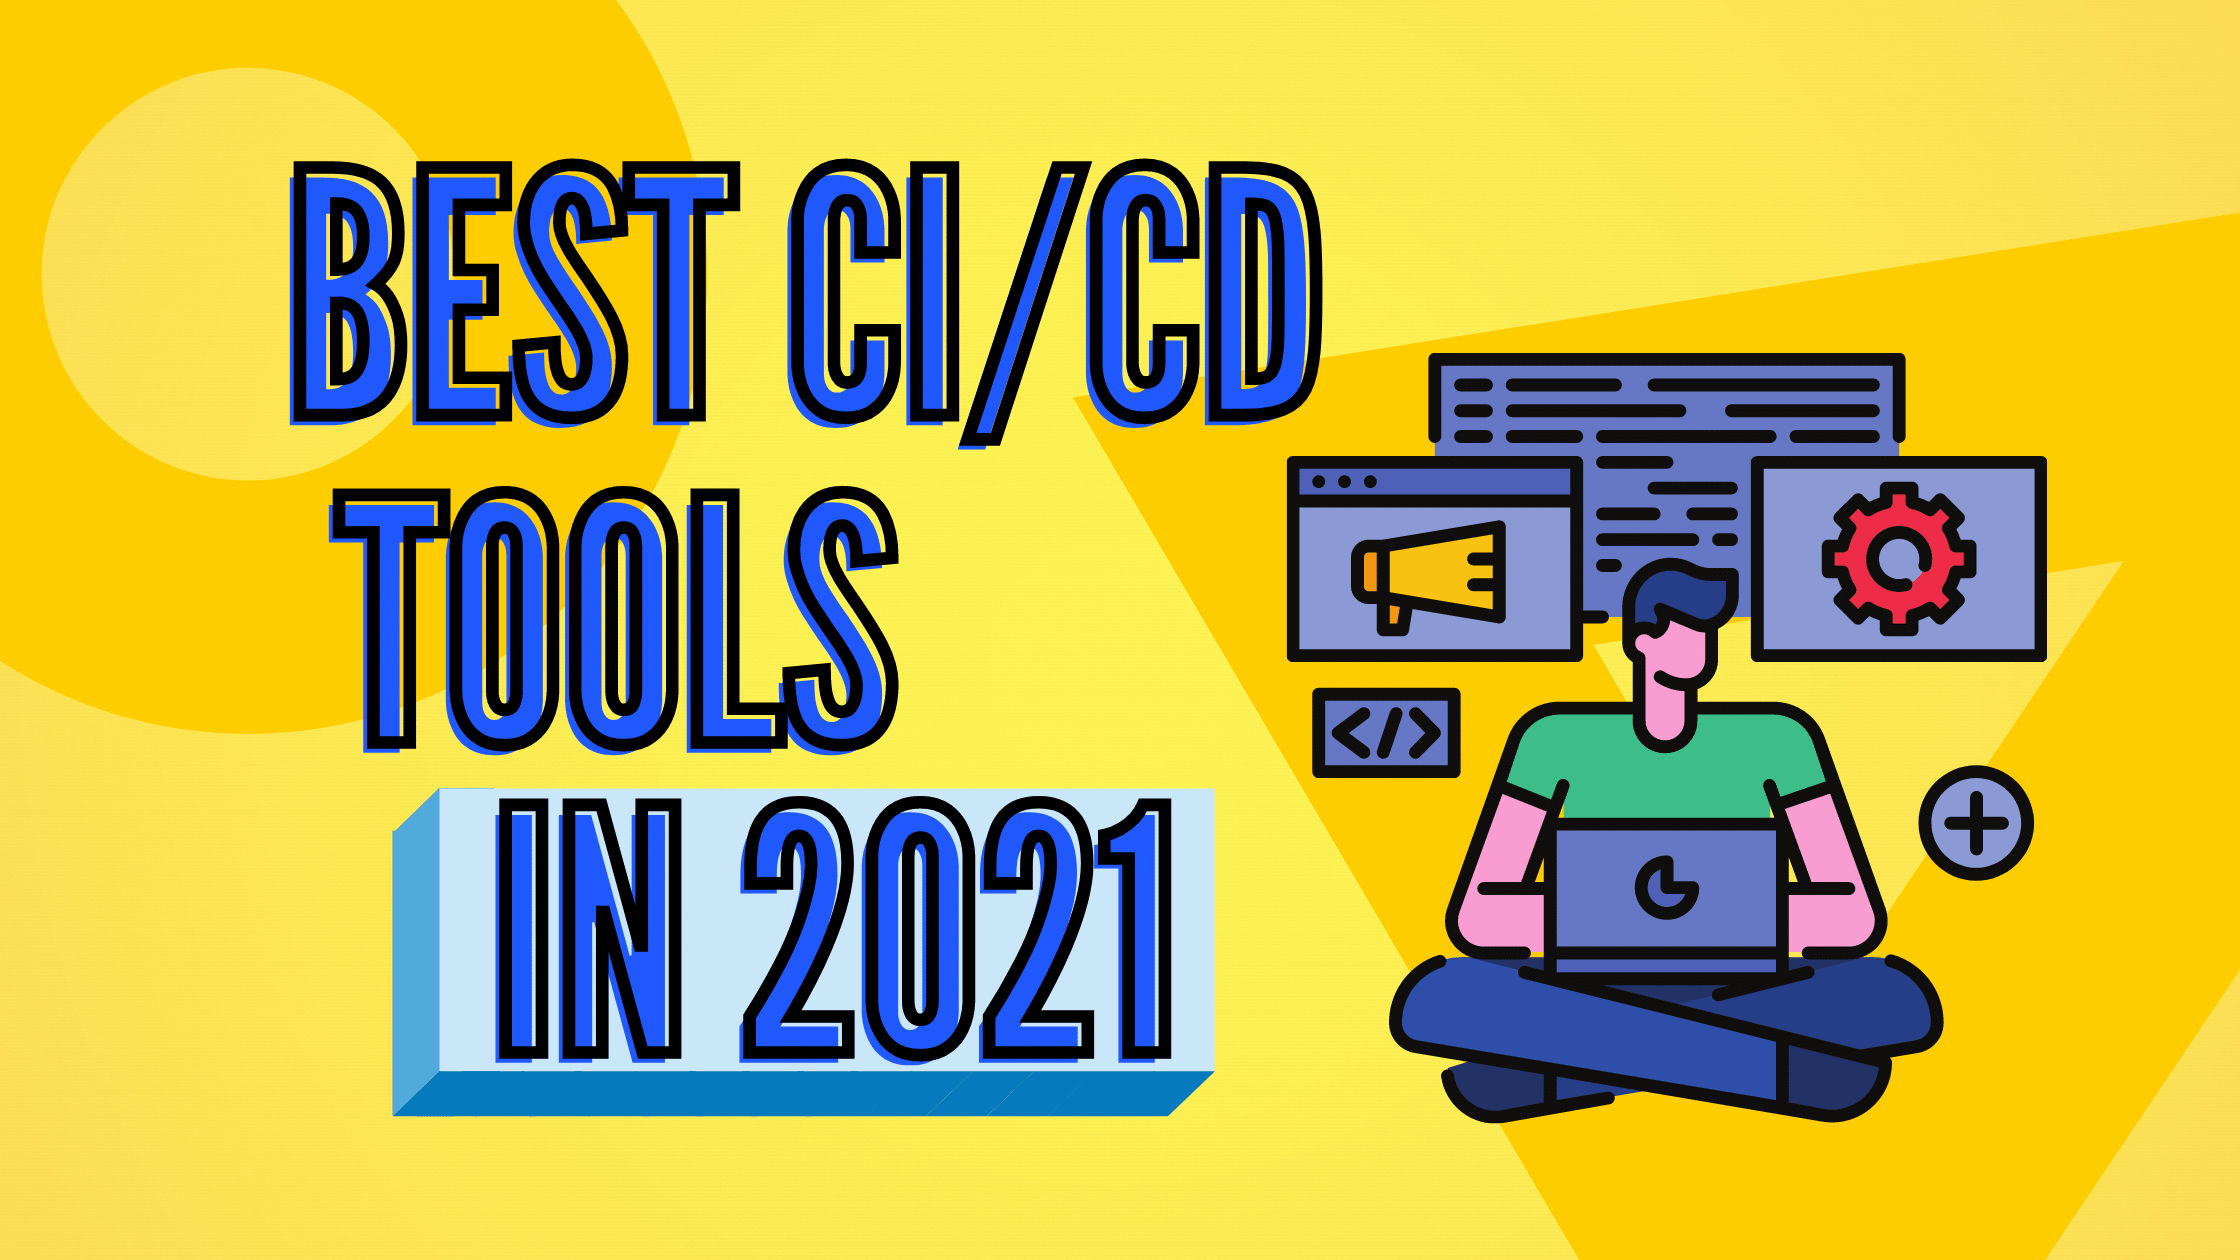 The 7 Best CI/CD Tools in 2021